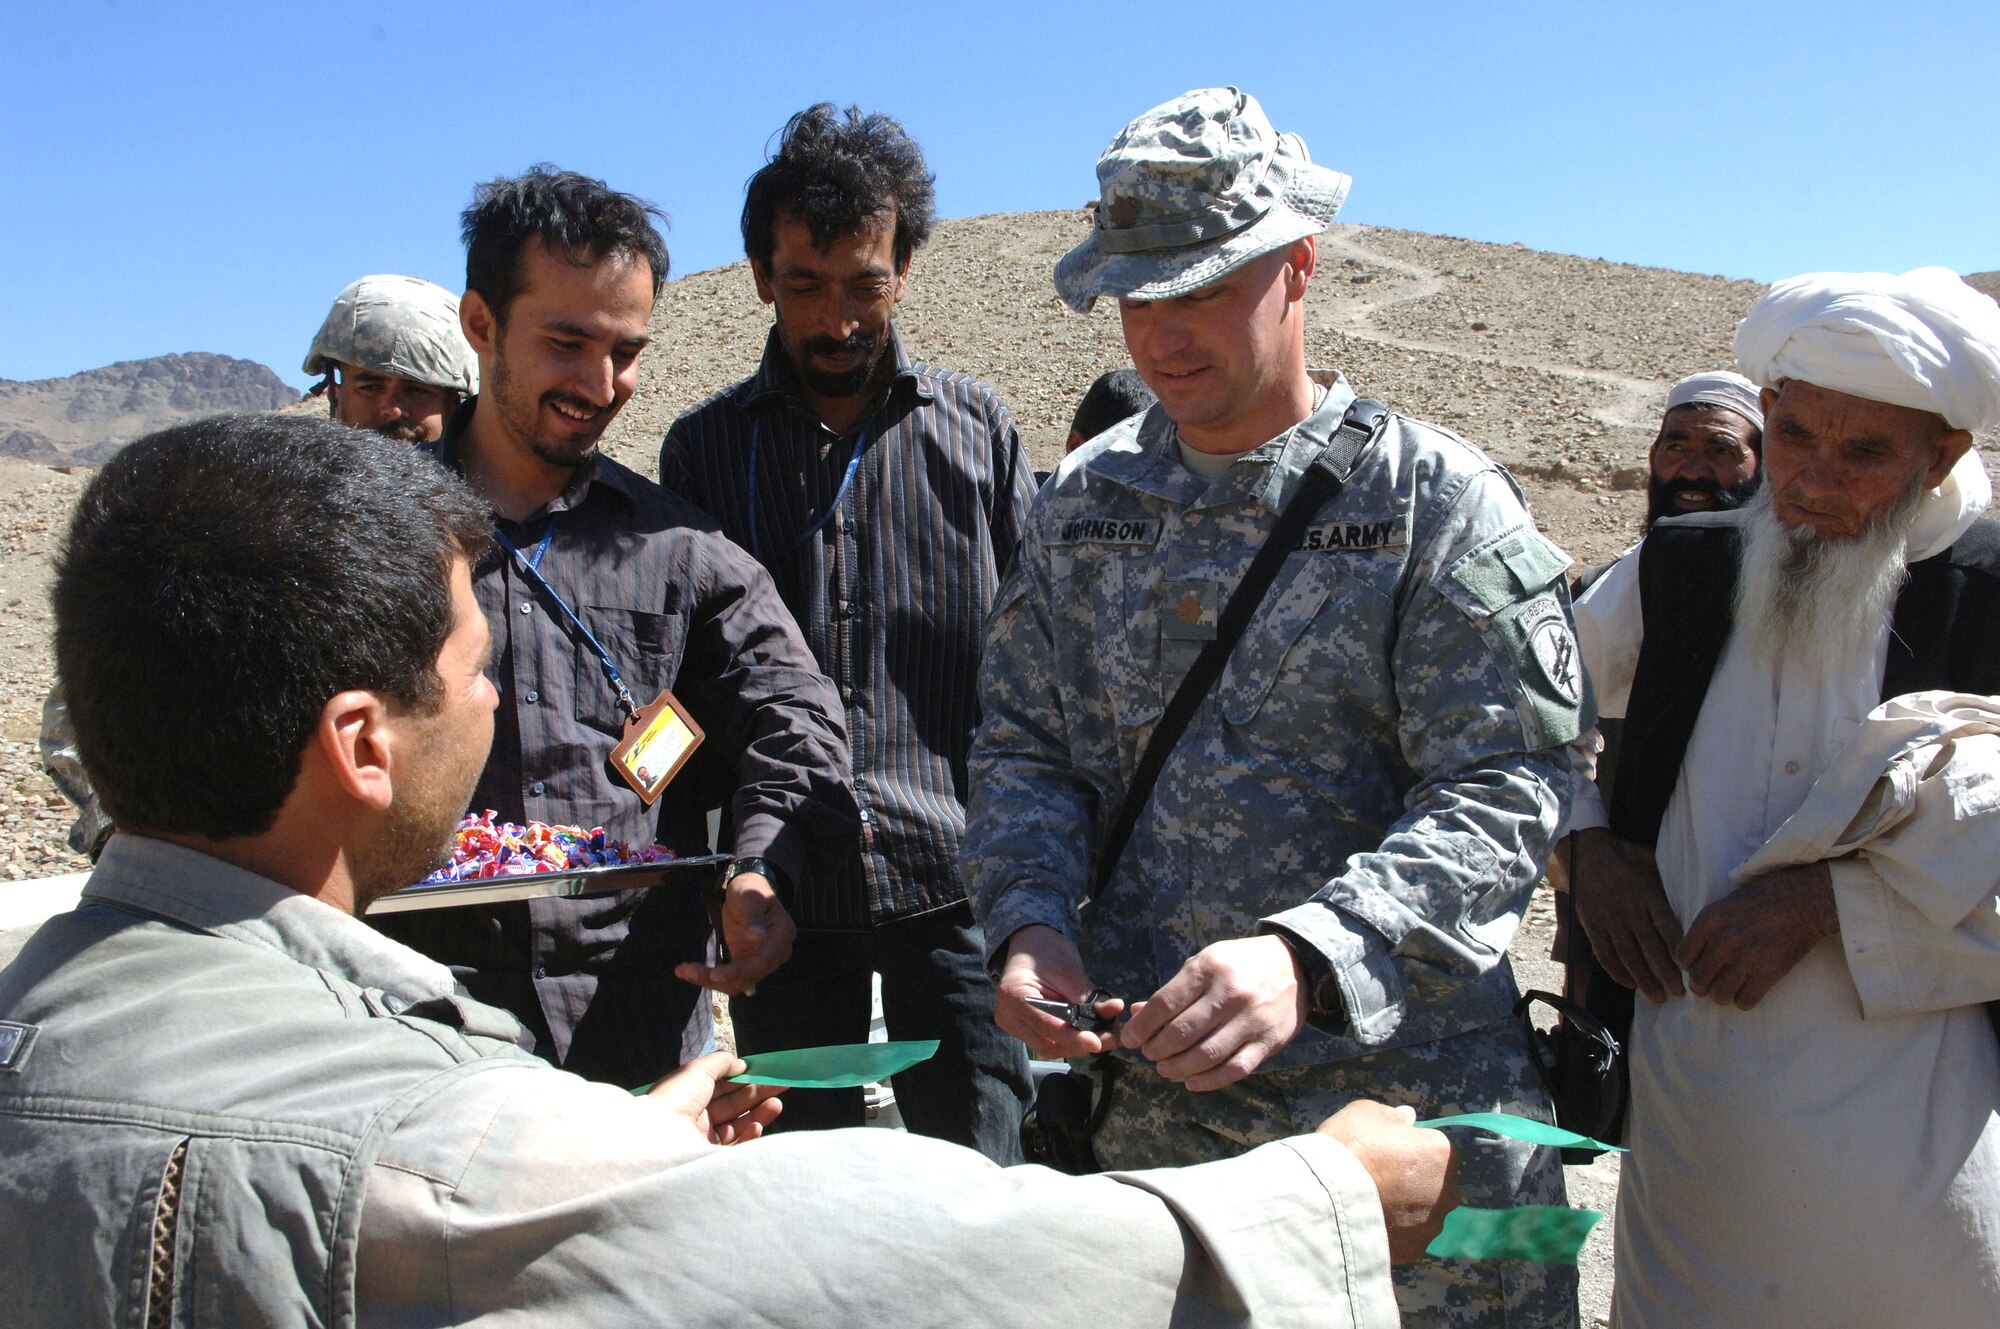 Army Major Don Johnson, team leader of the Air Force-led Bagram Provincial Reconstruction Team, oversees the opening of a new well in the Kohi Safi valley in the Parwan Province of Afghanistan.  The well will provide clean drinking water to several hundred villagers in the nearby village of Baba ghombakay. (U.S. Air Force photo/Tech. Sgt. Joseph Kapinos)